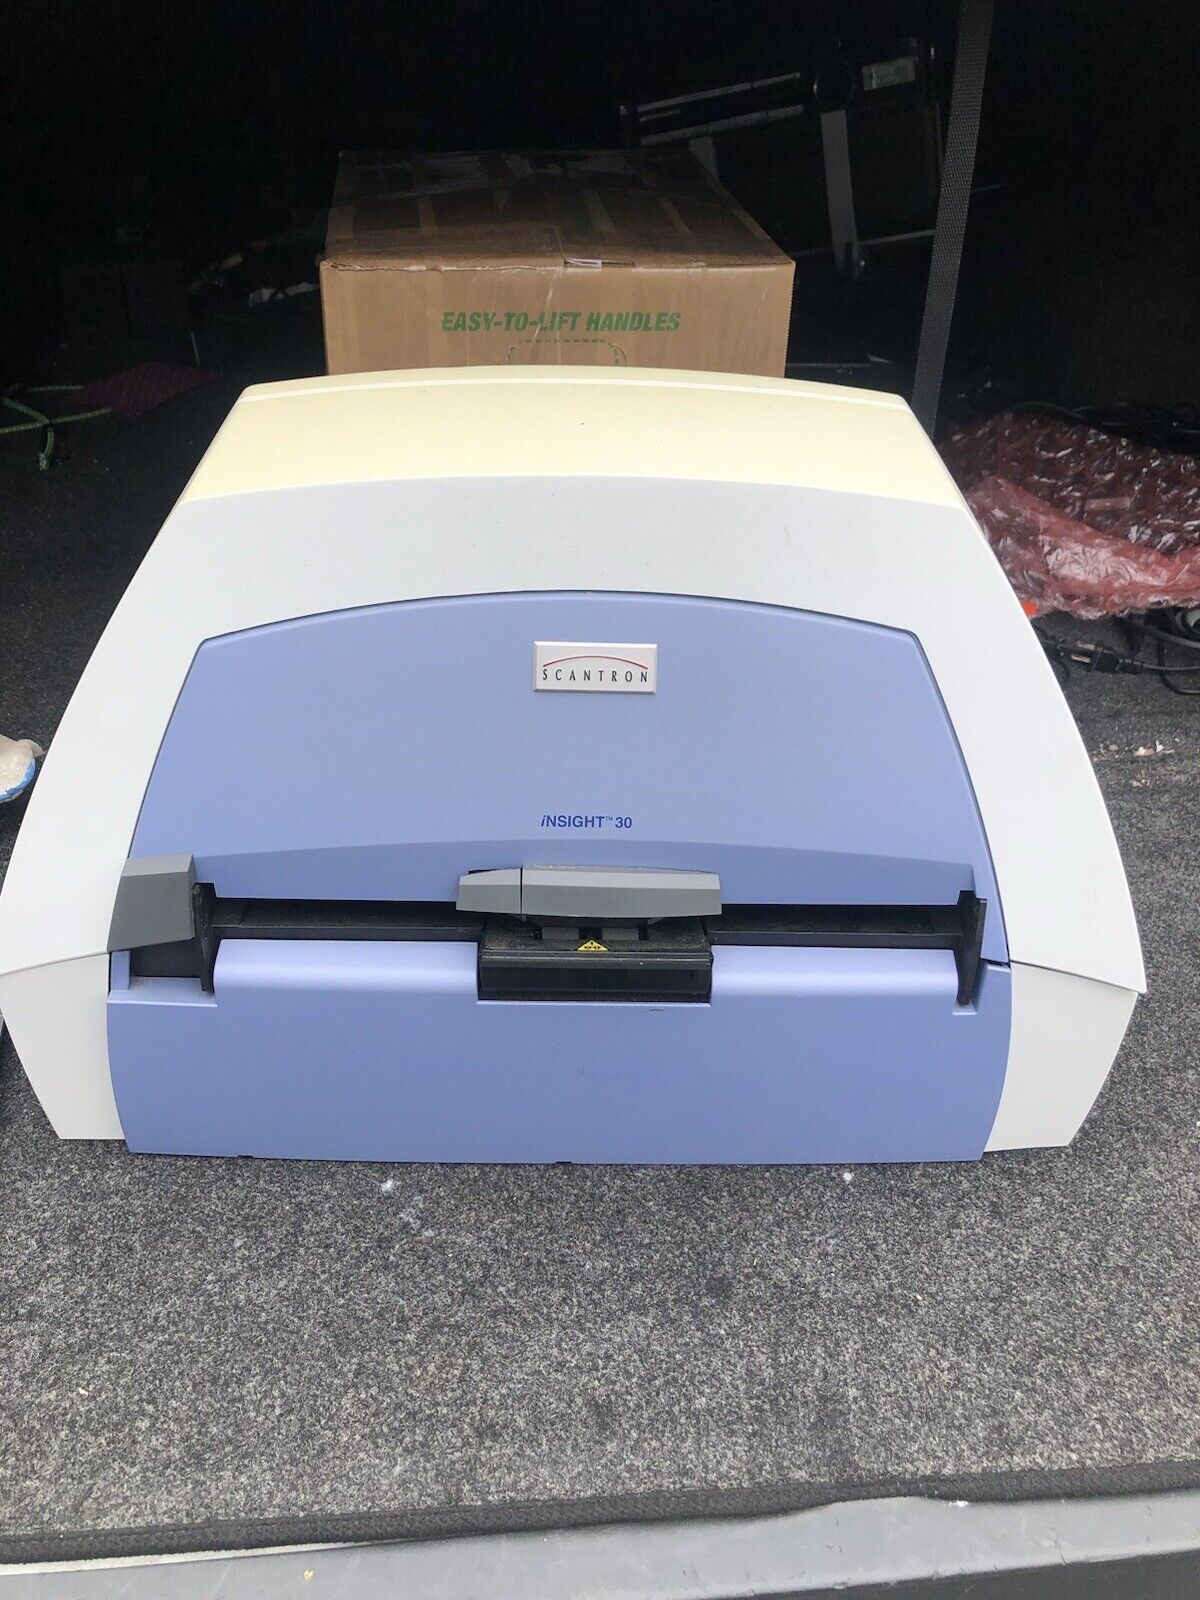 Scantron iNSIGHT 30 Test Grading / Optical Mark Read Scanner UNTested Parts.